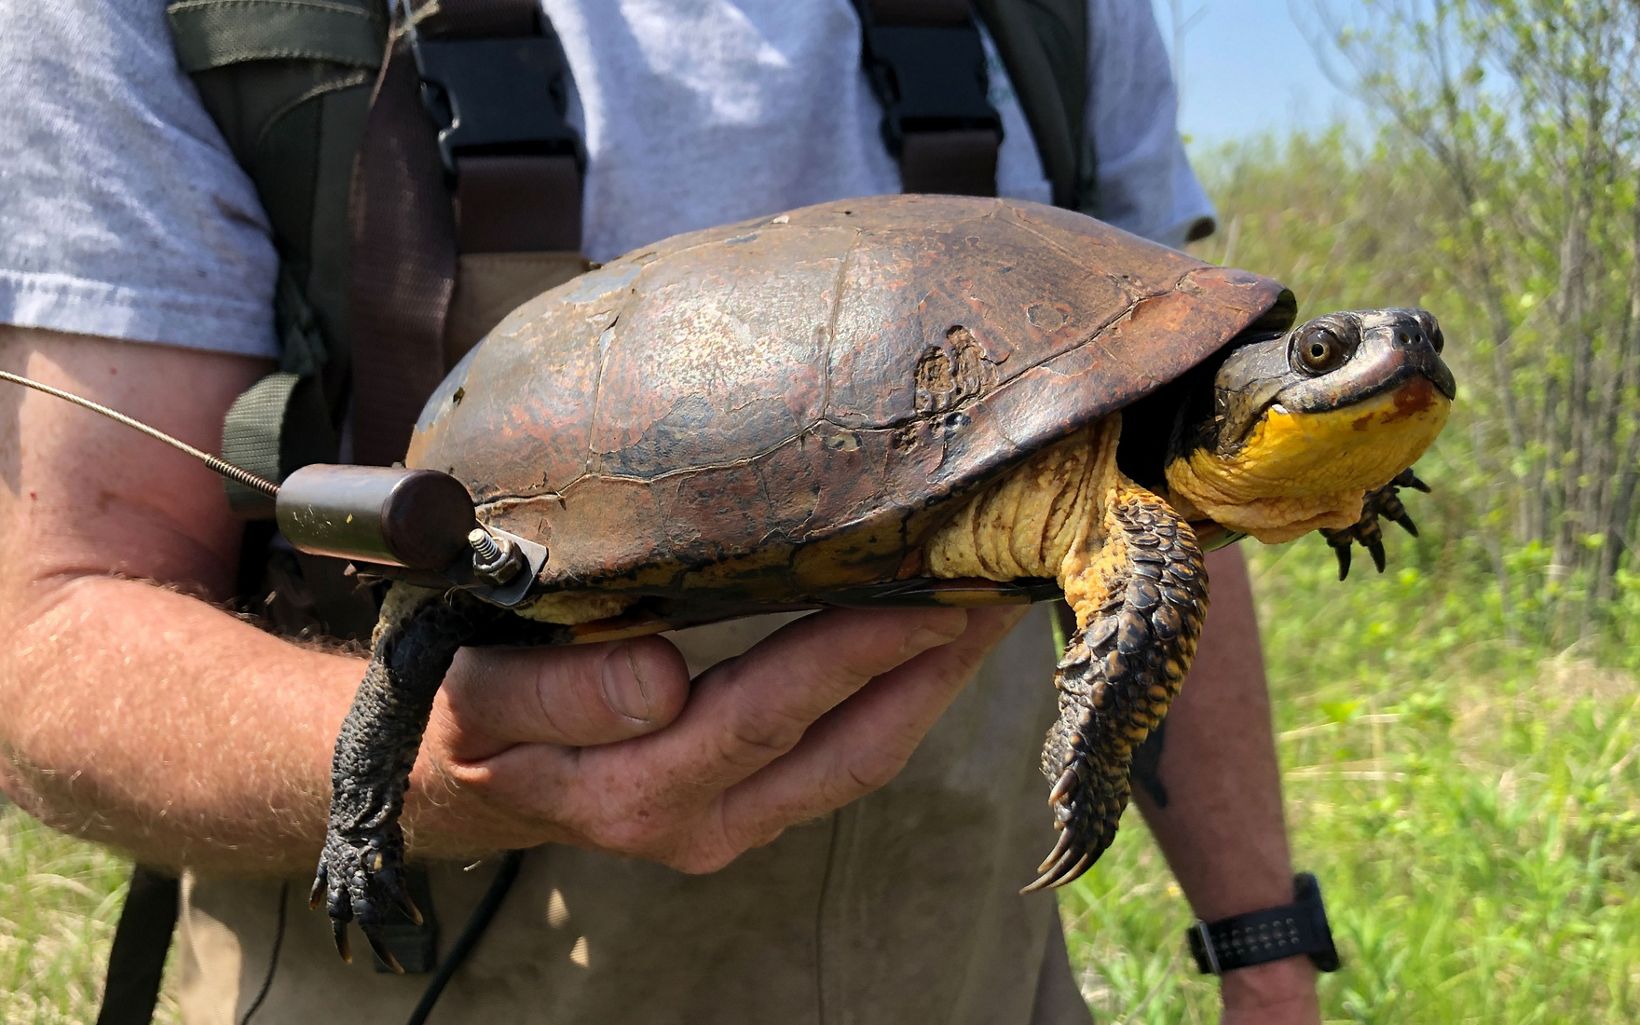 Blanding’s Turtle This female Blanding’s turtle “Zelda” carries a tracking device as part of a research project to learn more about her species’ habitat needs. © Stephanie Judge/TNC